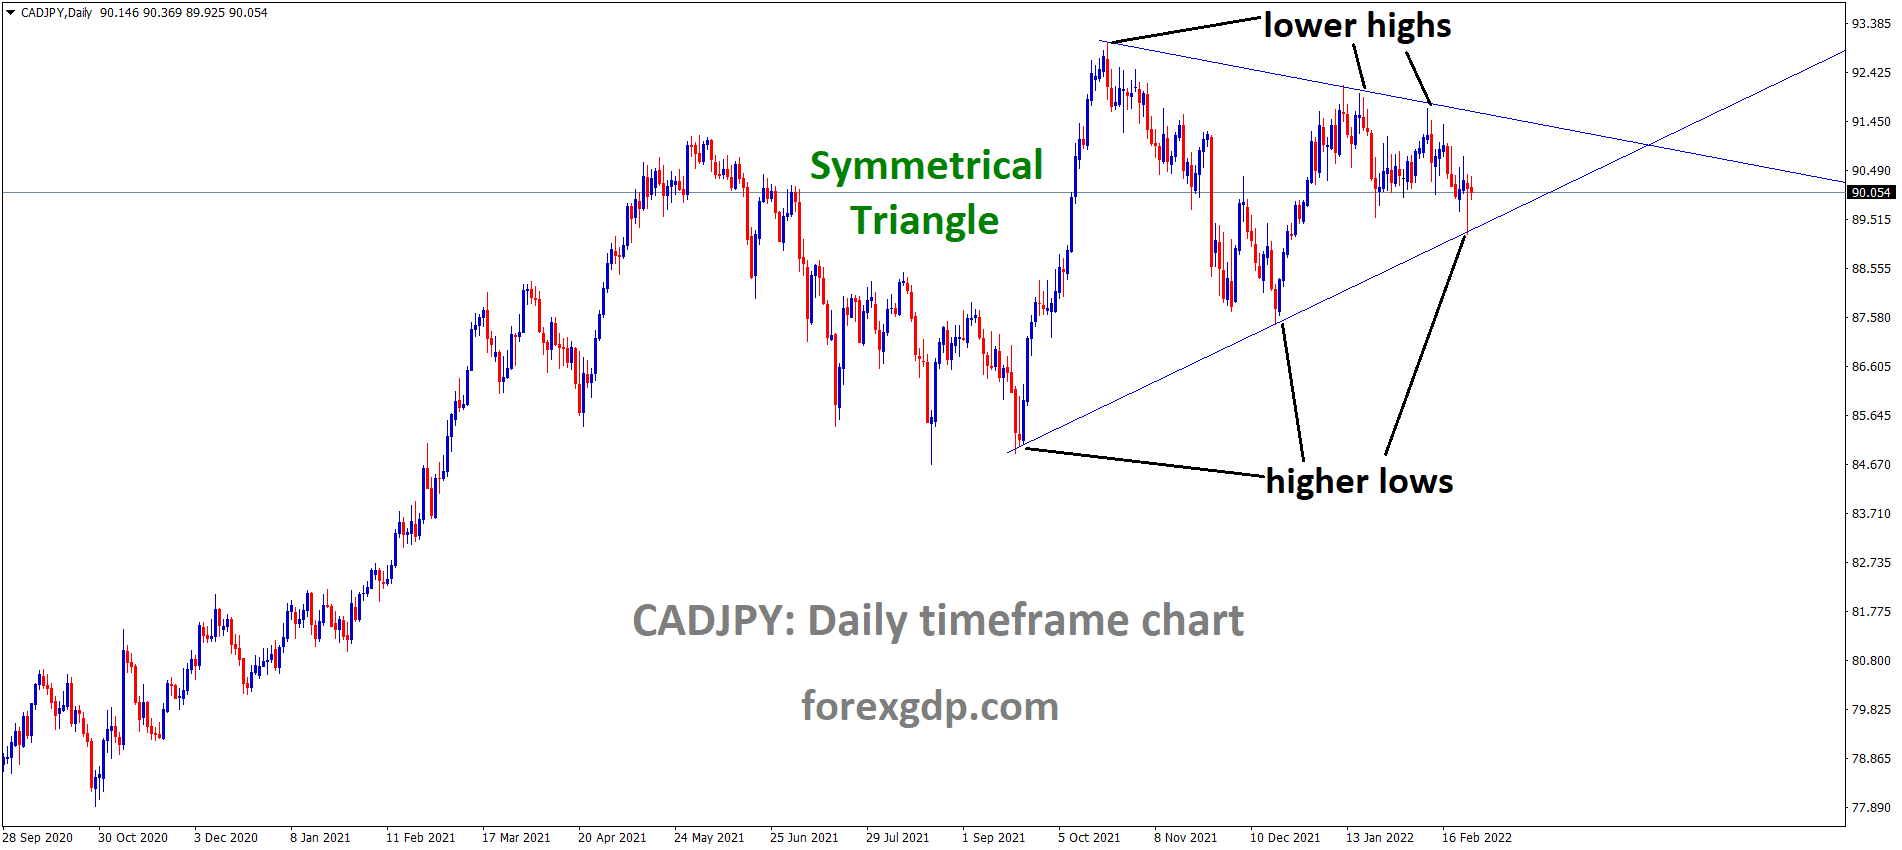 CADJPY is moving in the Symmetrical triangle pattern and the market has rebounded from the Bottom area of the pattern.